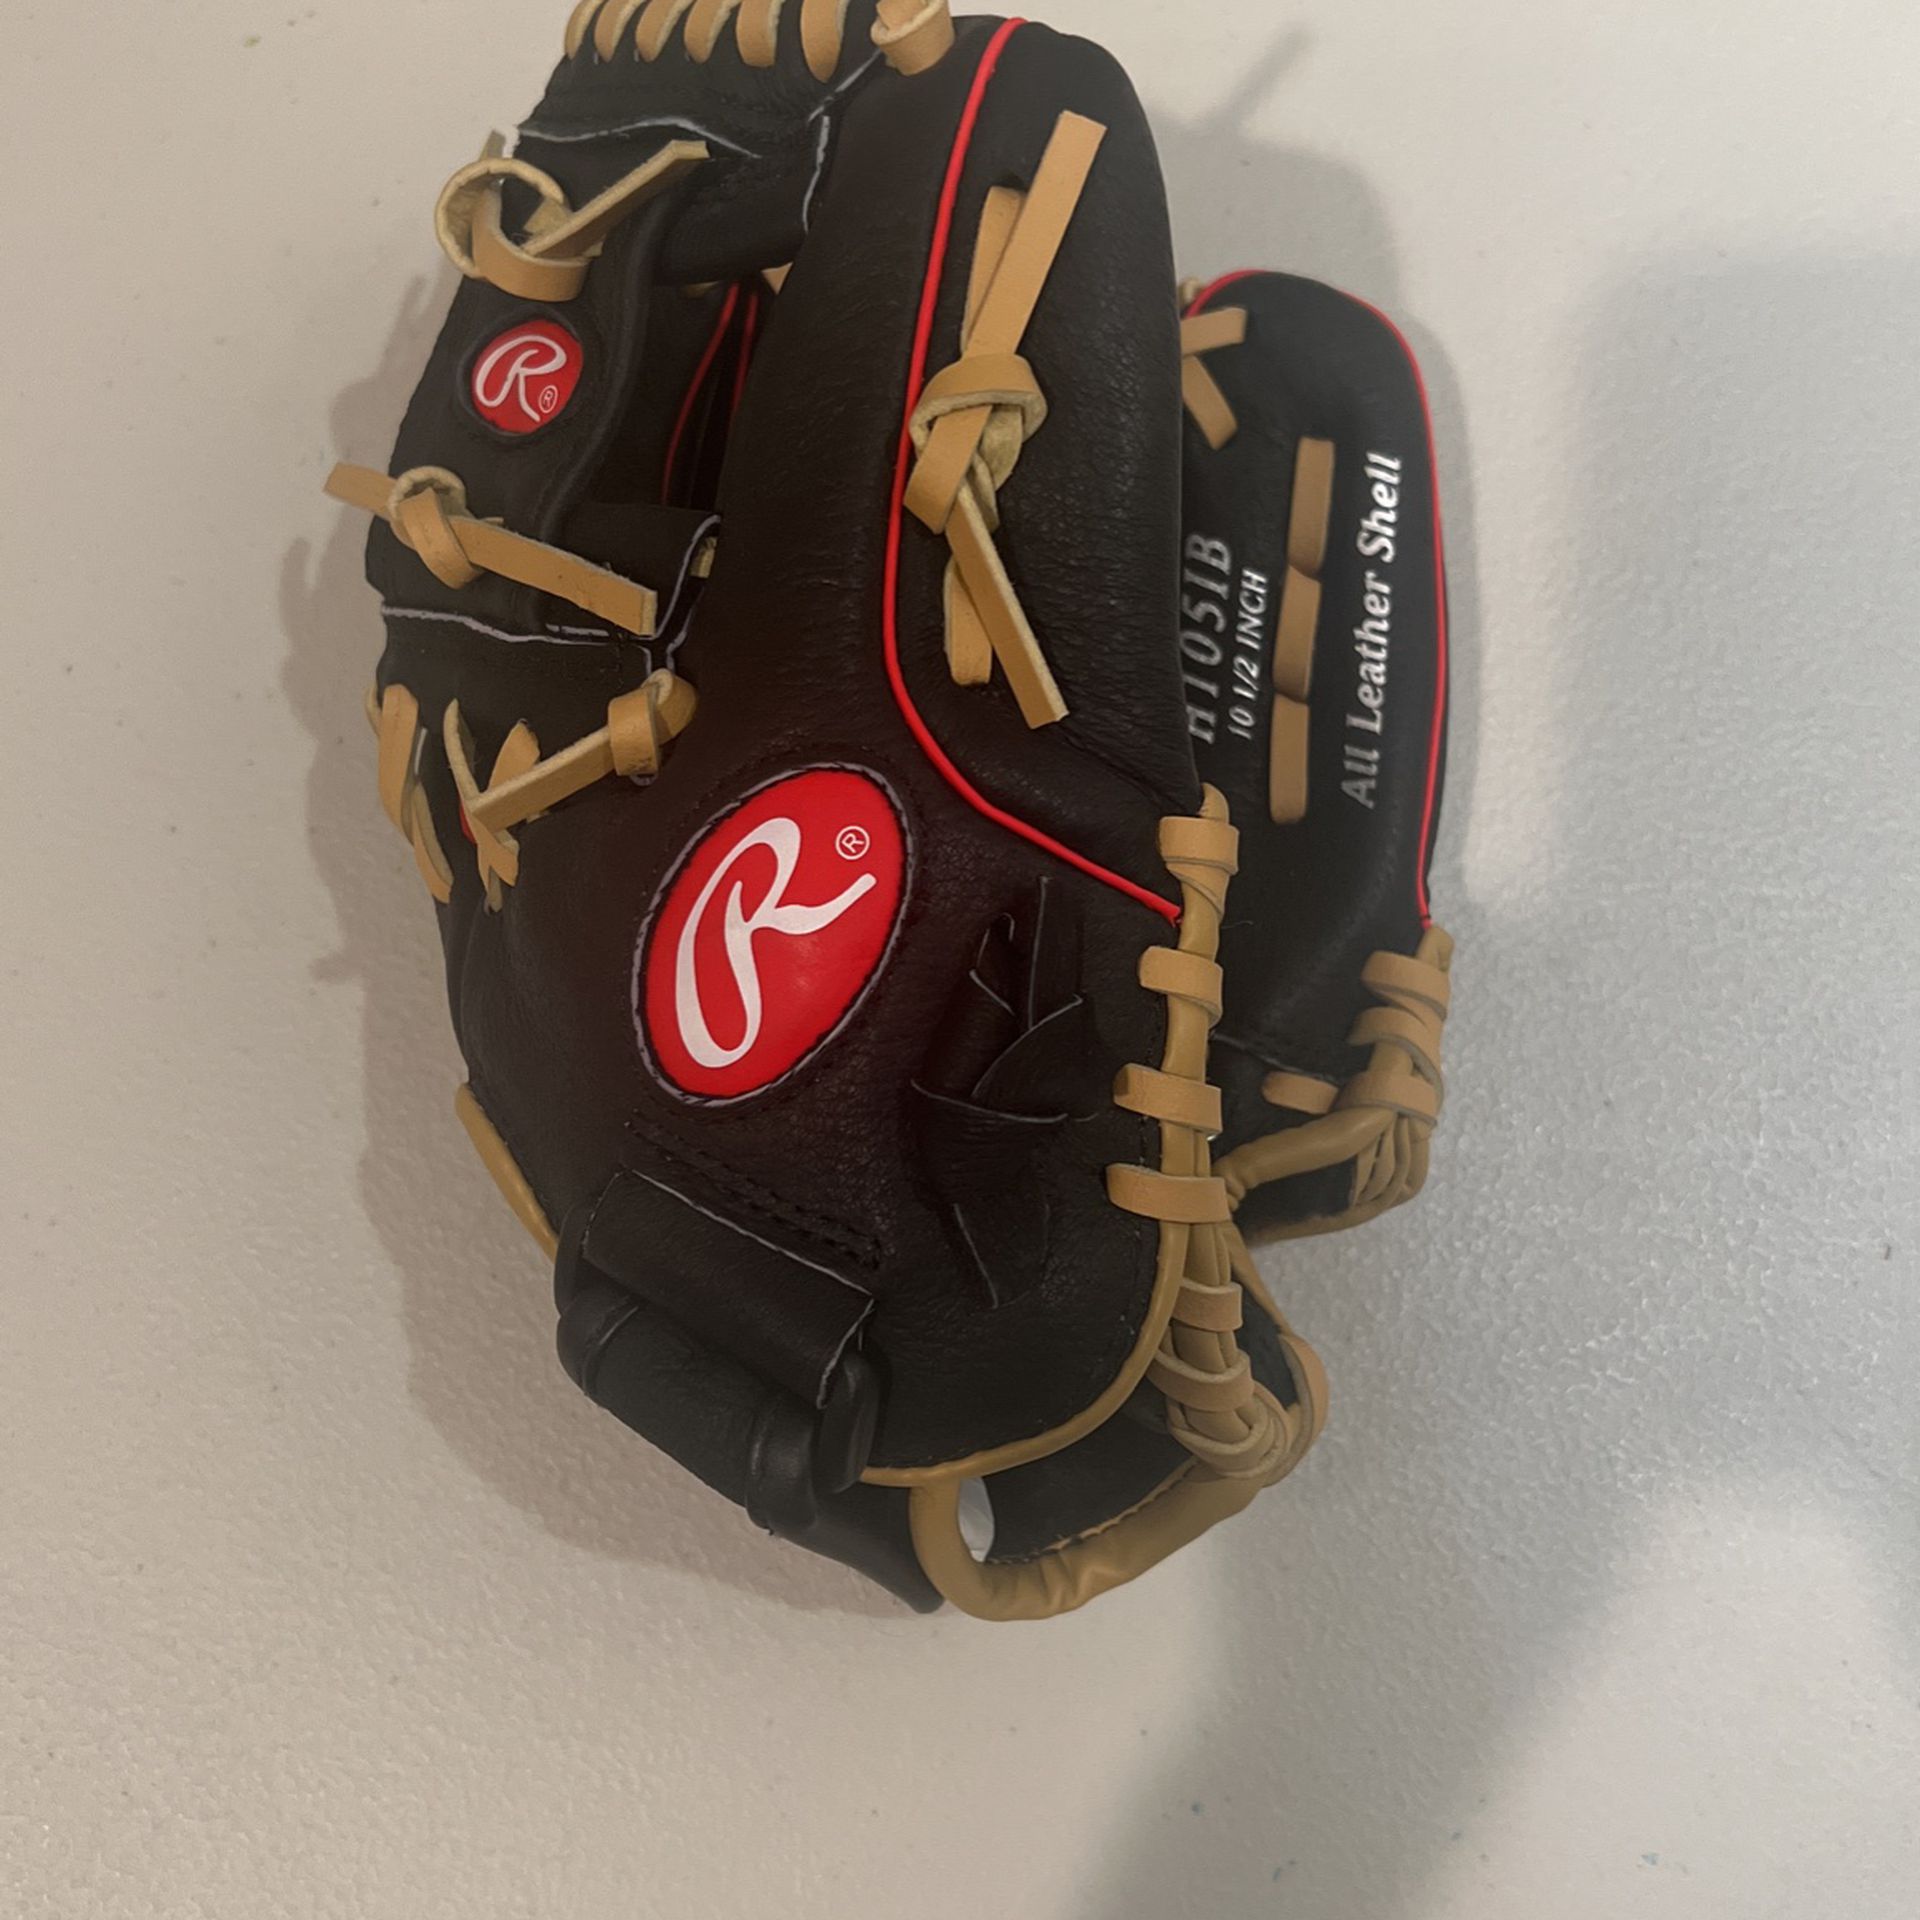 Rawlings 10.5” Youth Highlight Series Glove